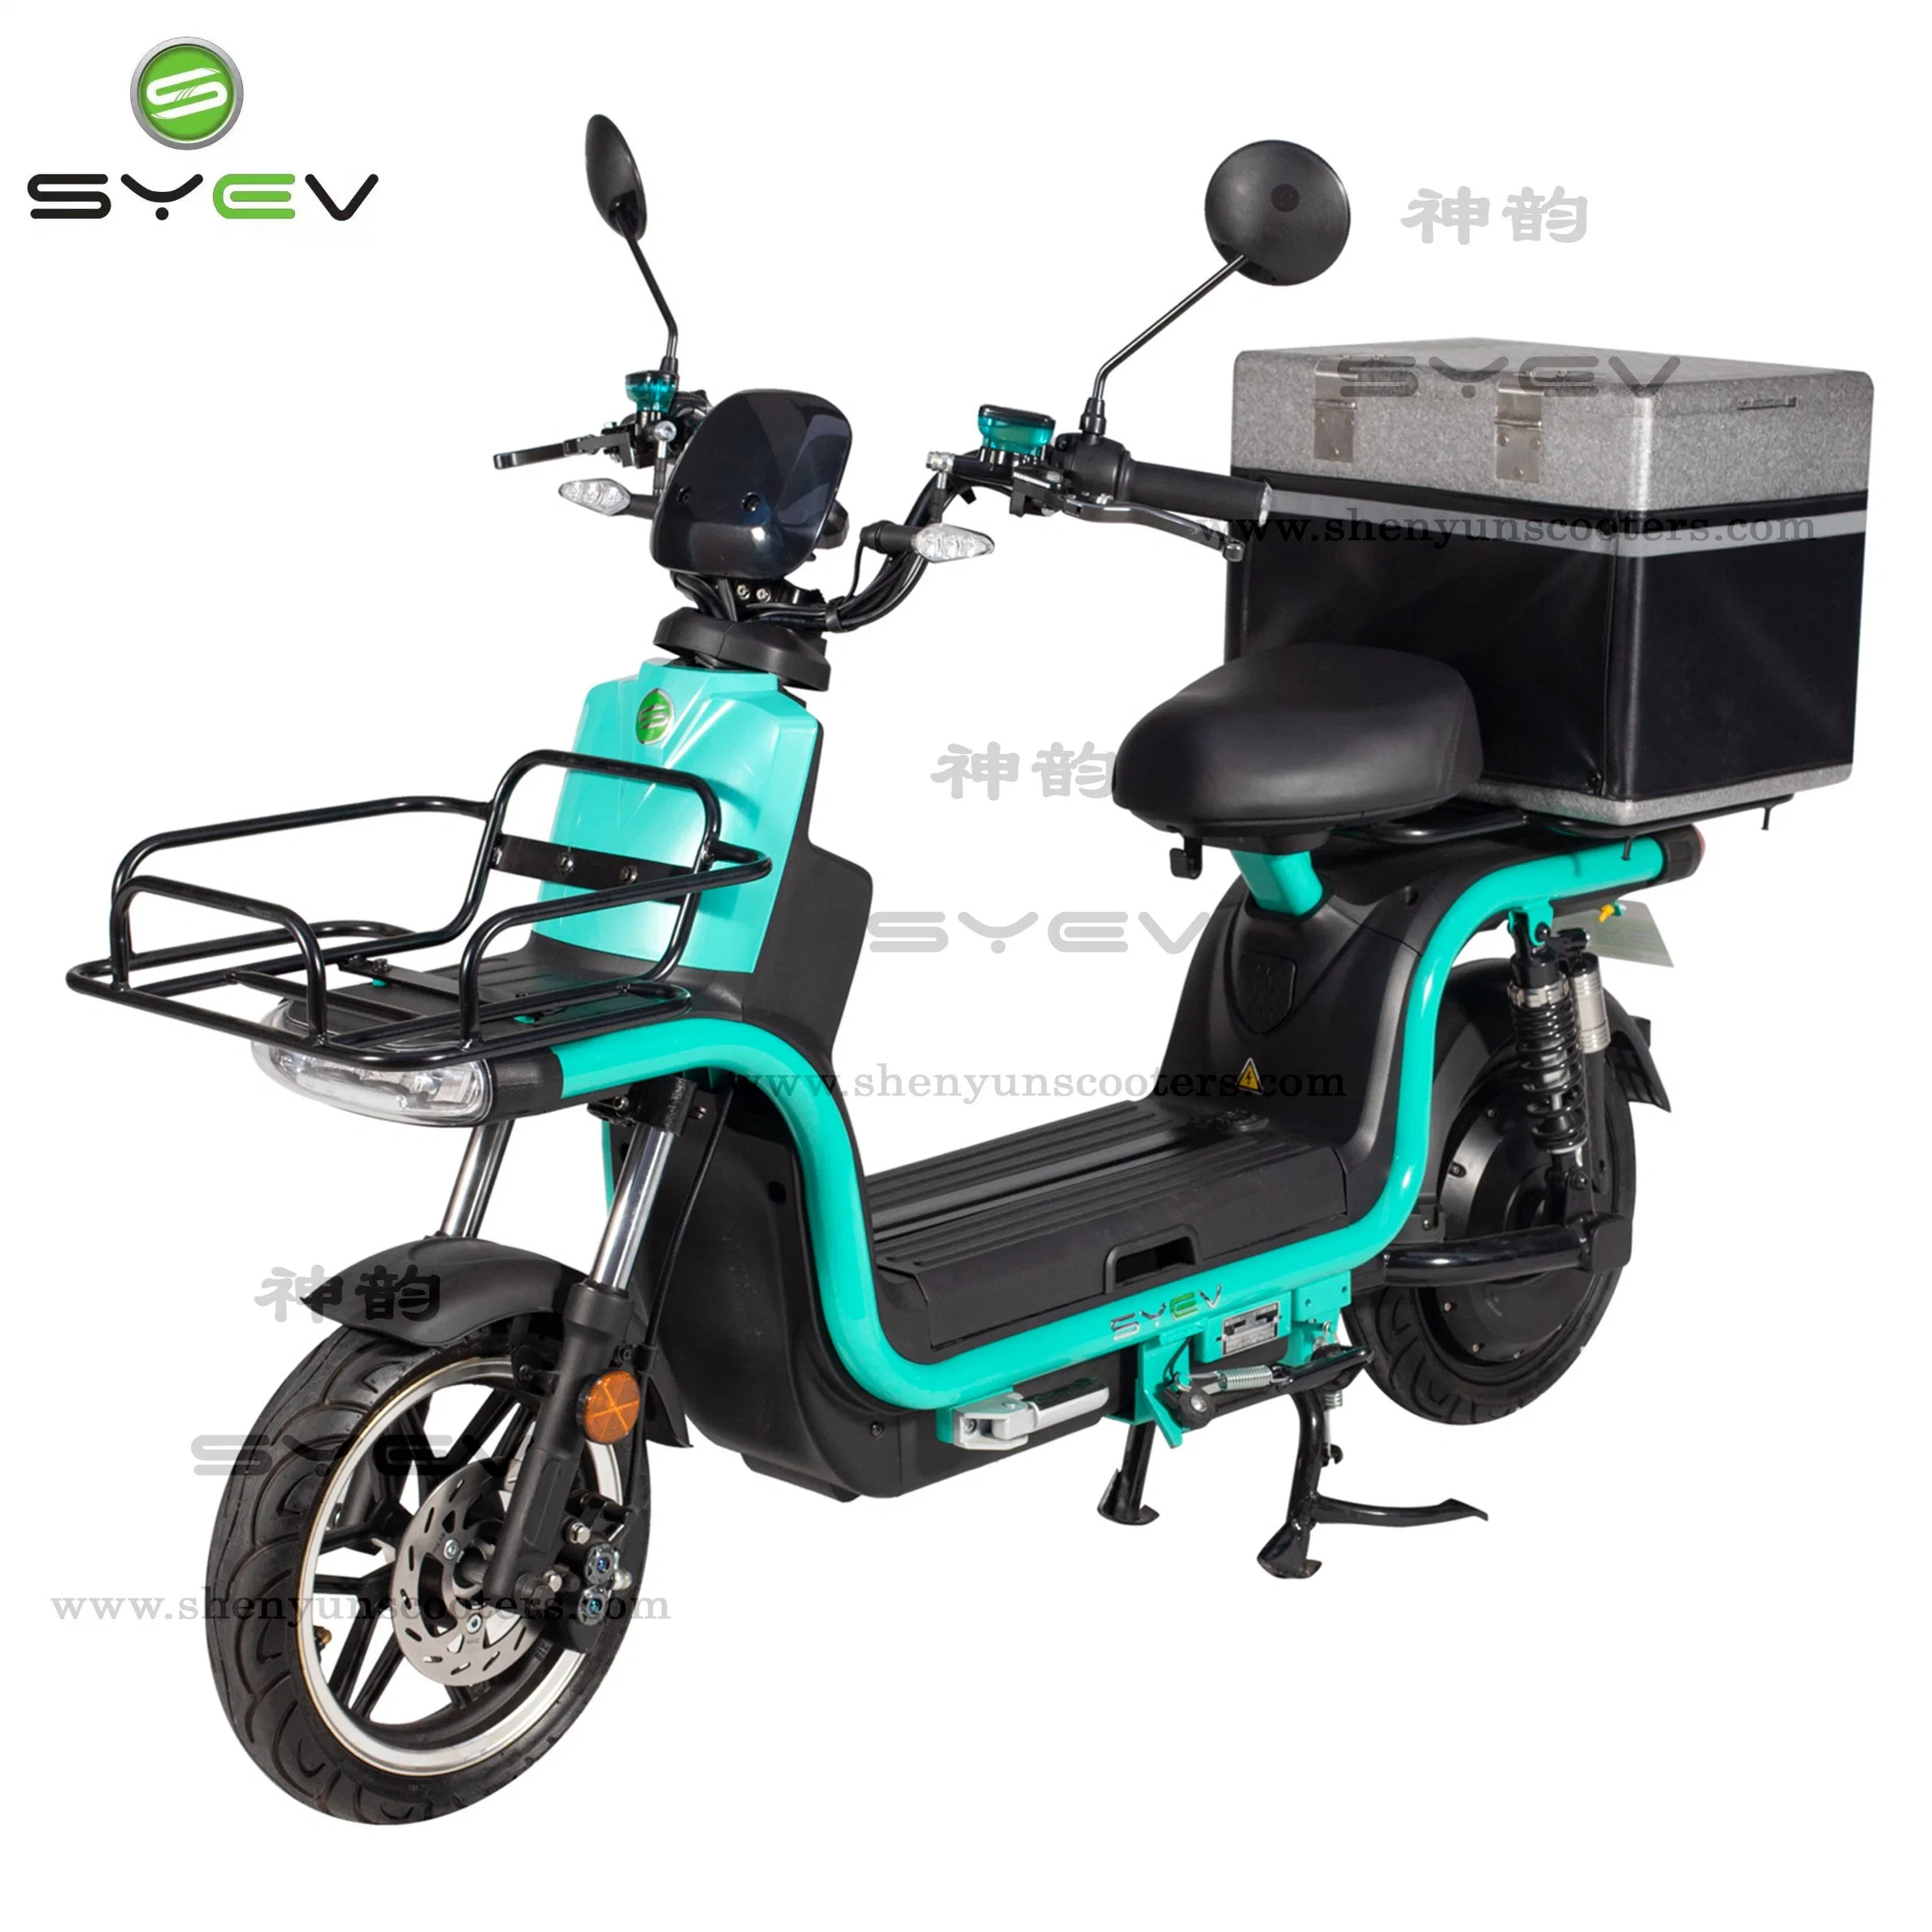 CE/EEC/Coc Approved Powerful Electric Motorcycle for Fast Food Delivery